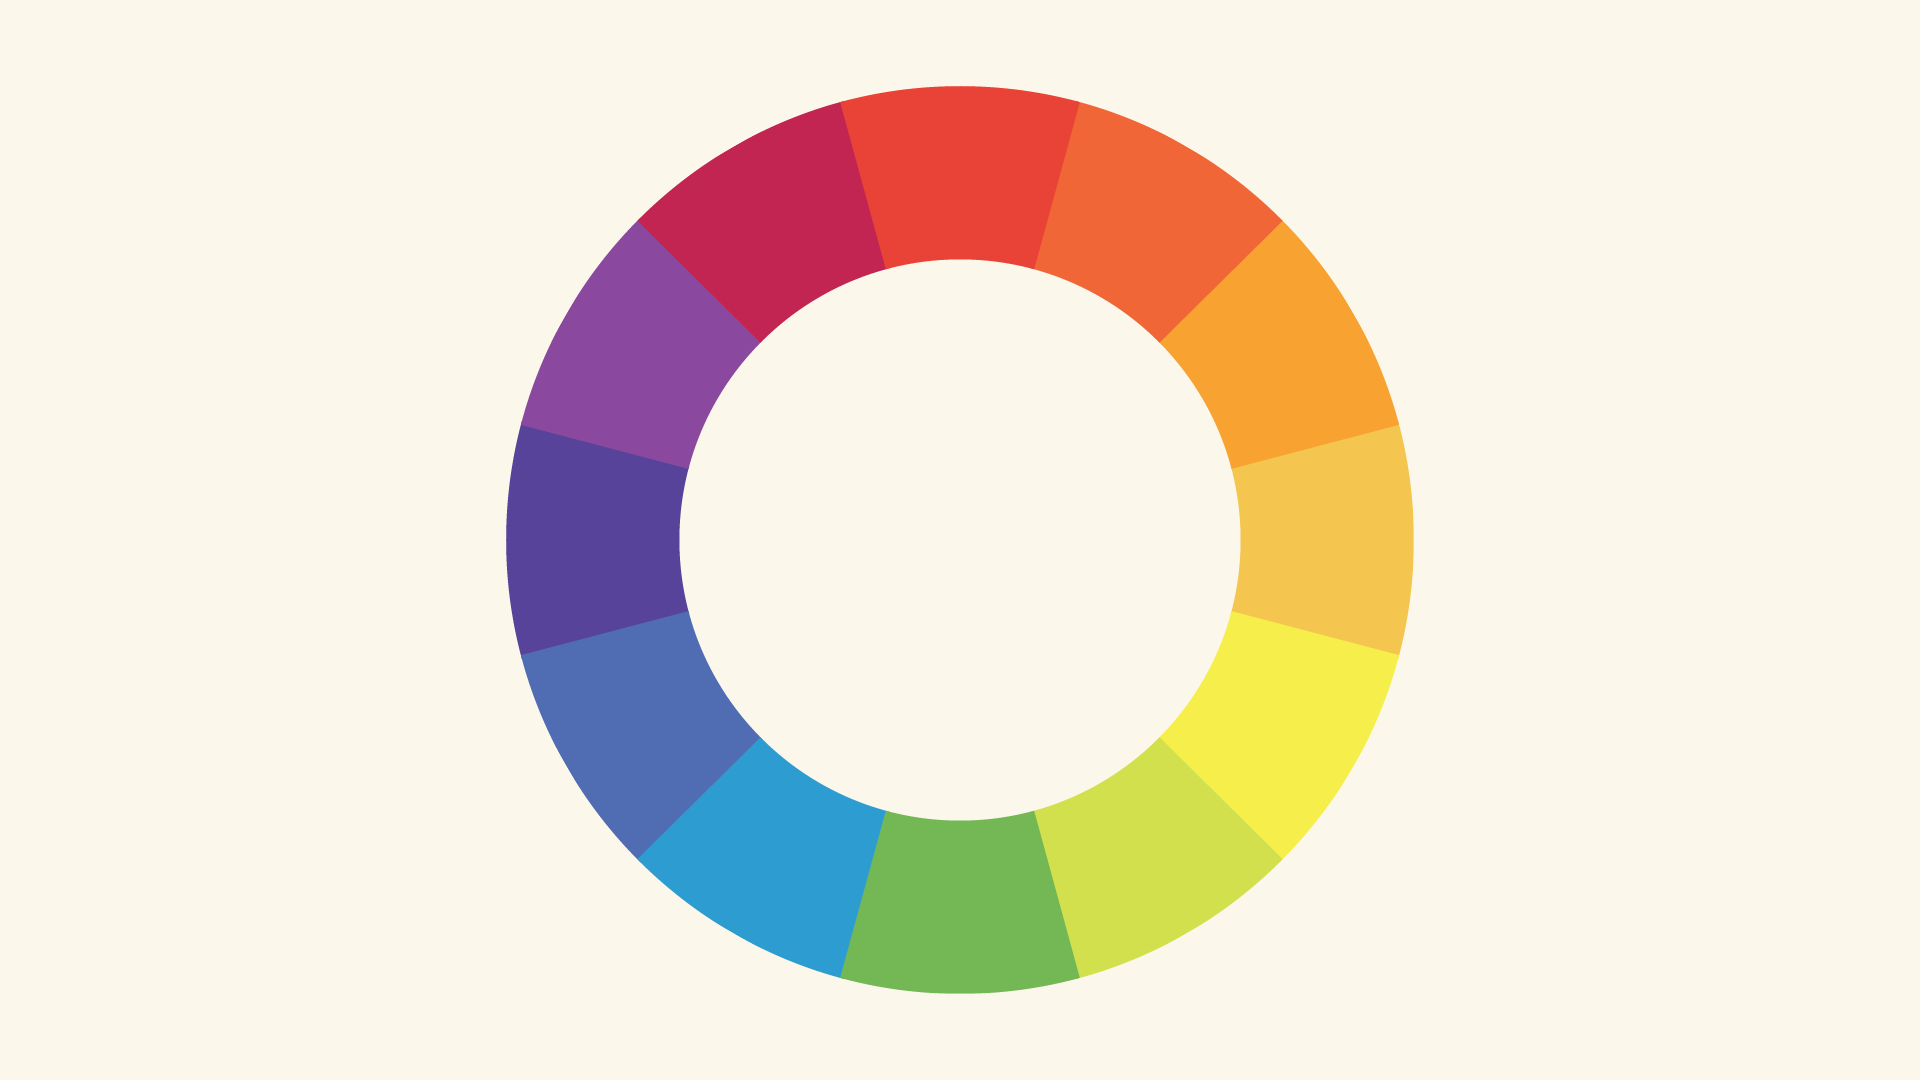 Colors Color Wheel Icon, PNG/ICO Icons, 256x256, 128x128, 64x64 